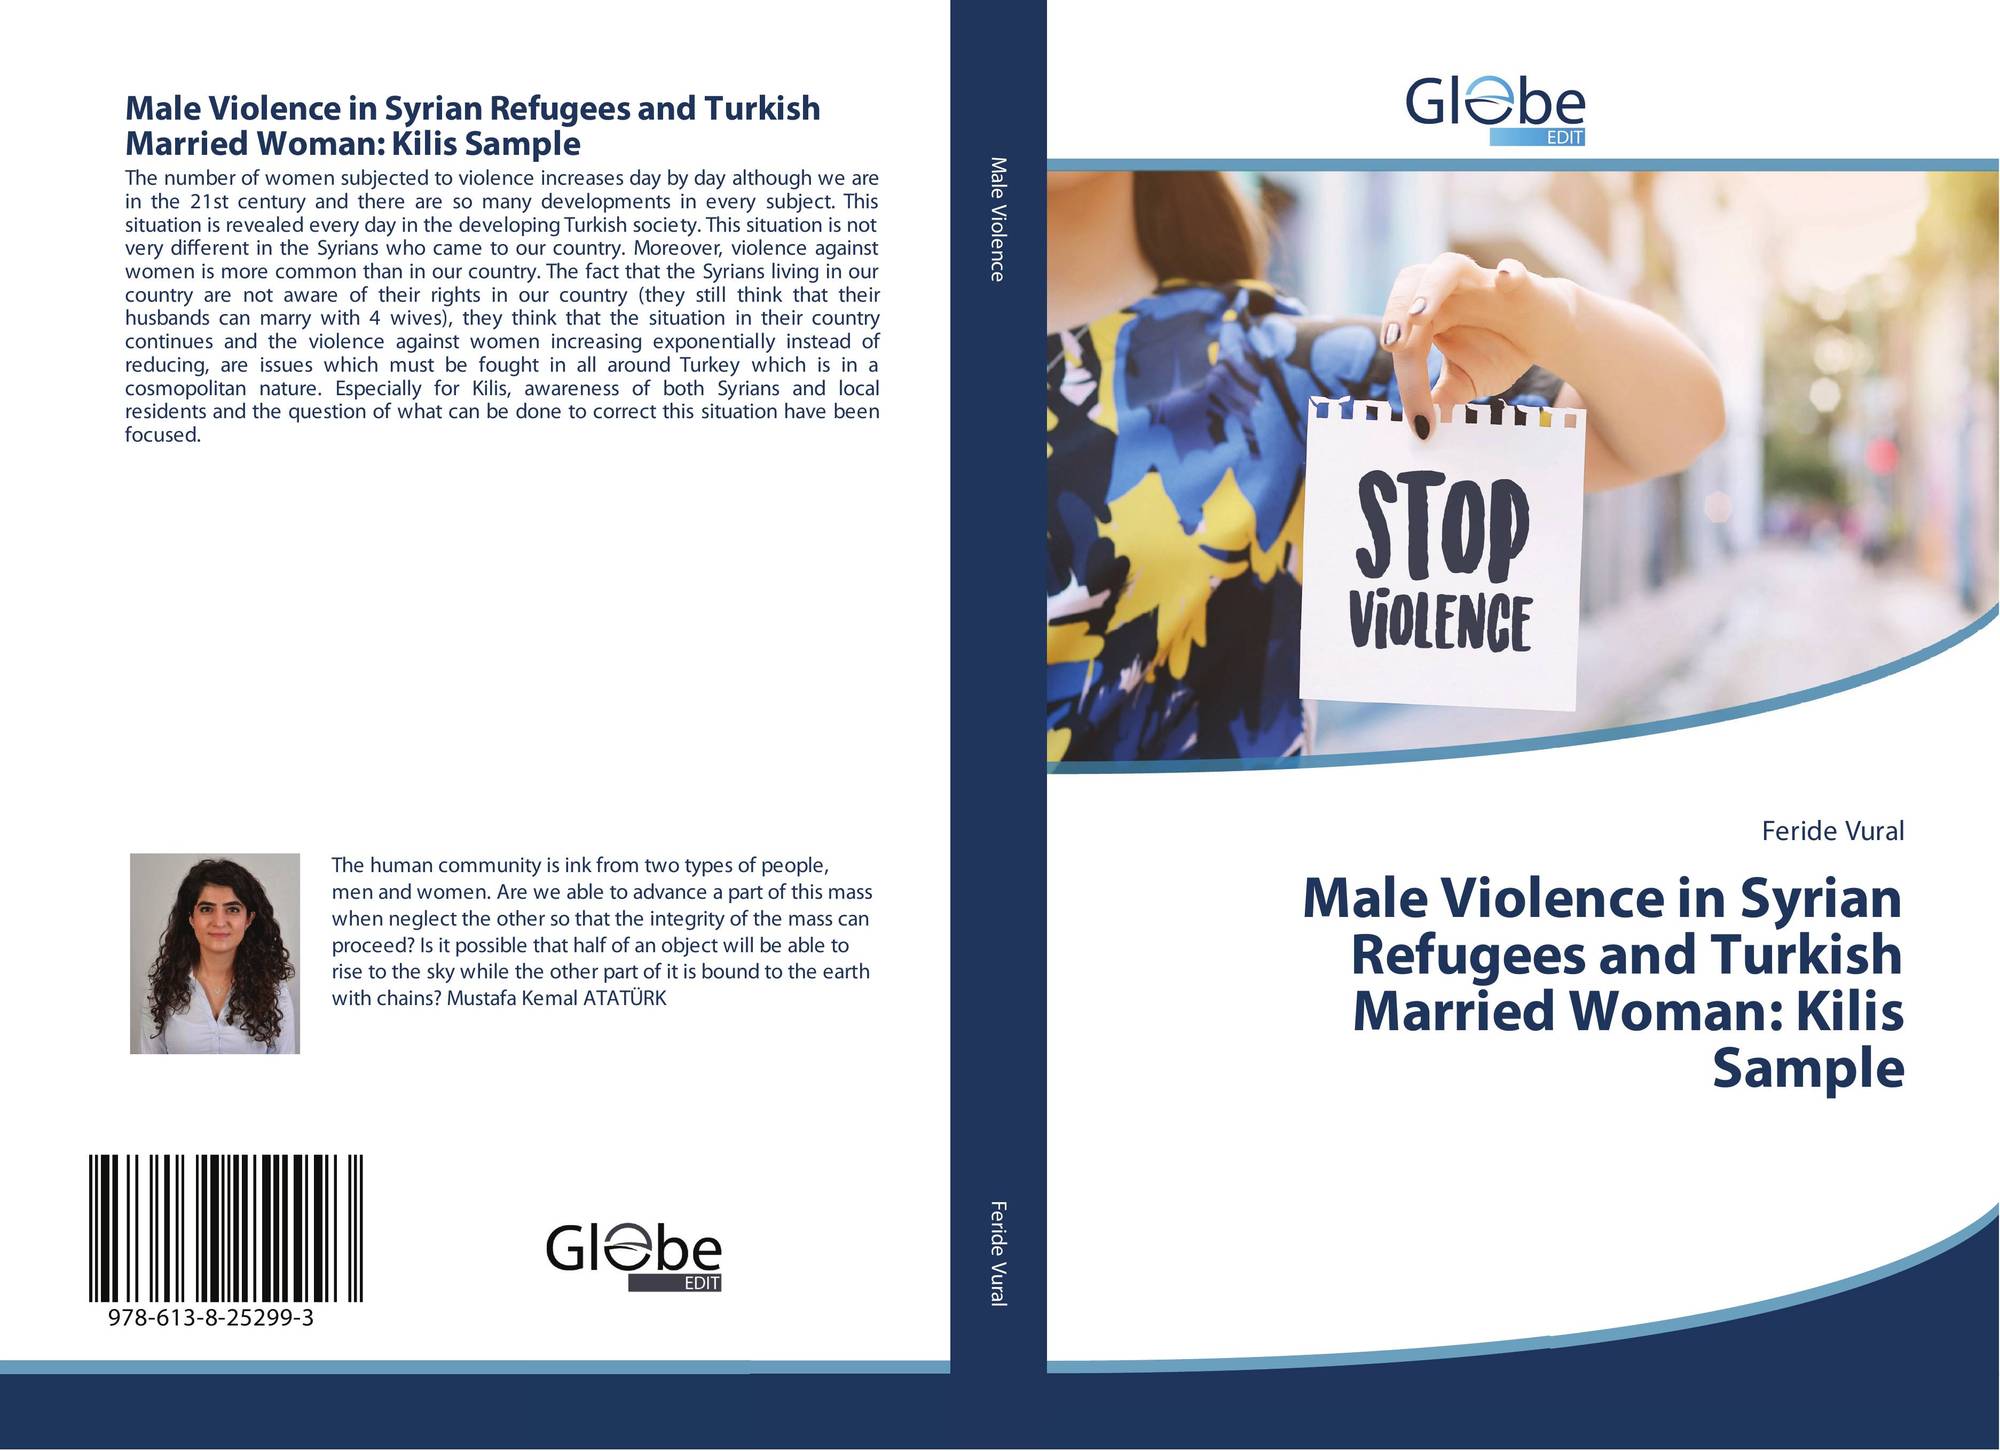 Samples of Woman in Globe Logo - Male Violence in Syrian Refugees and Turkish Married Woman: Kilis ...